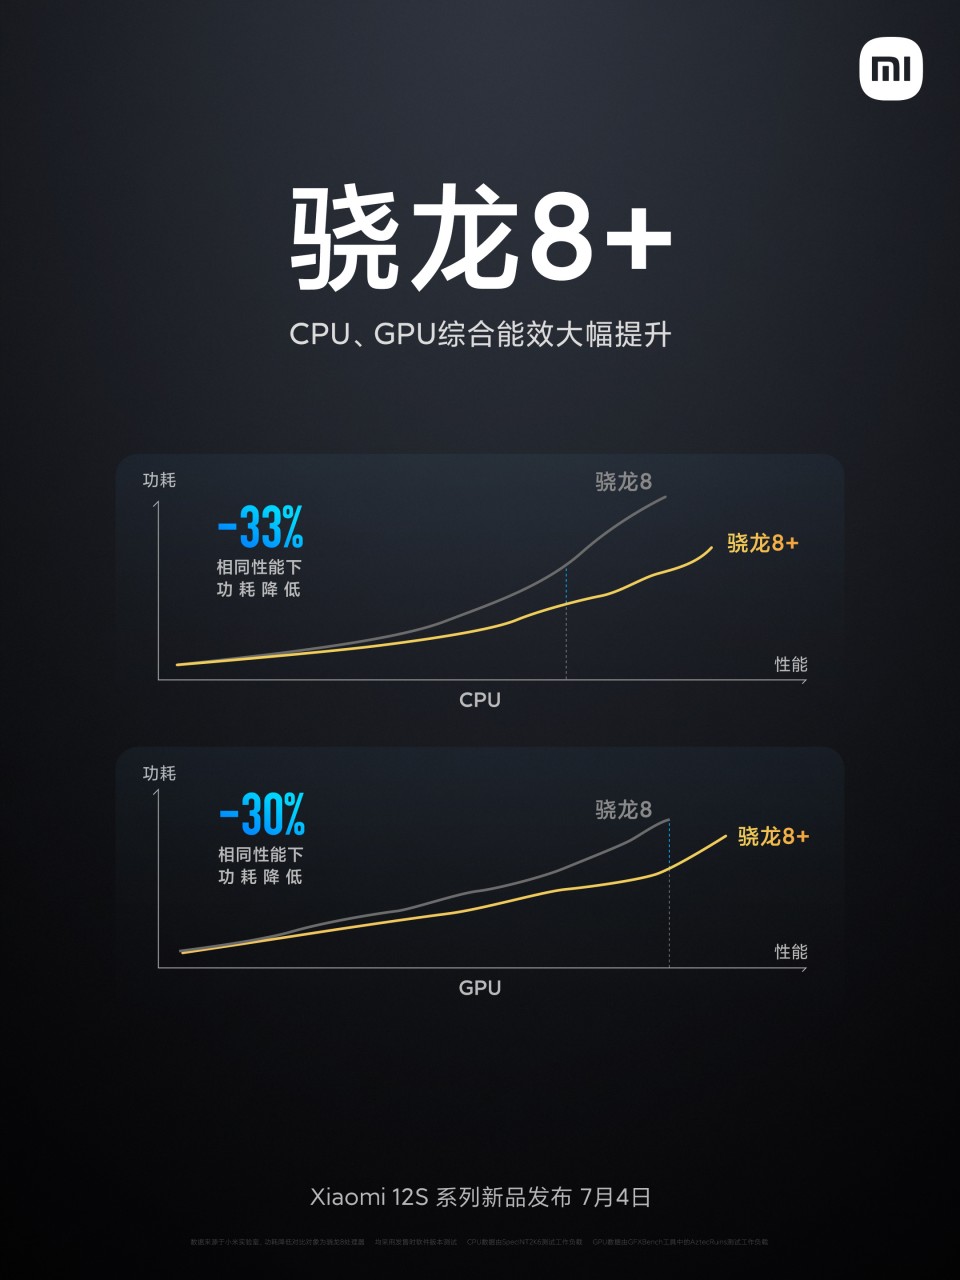 Xiaomi 12S and 12S Pro